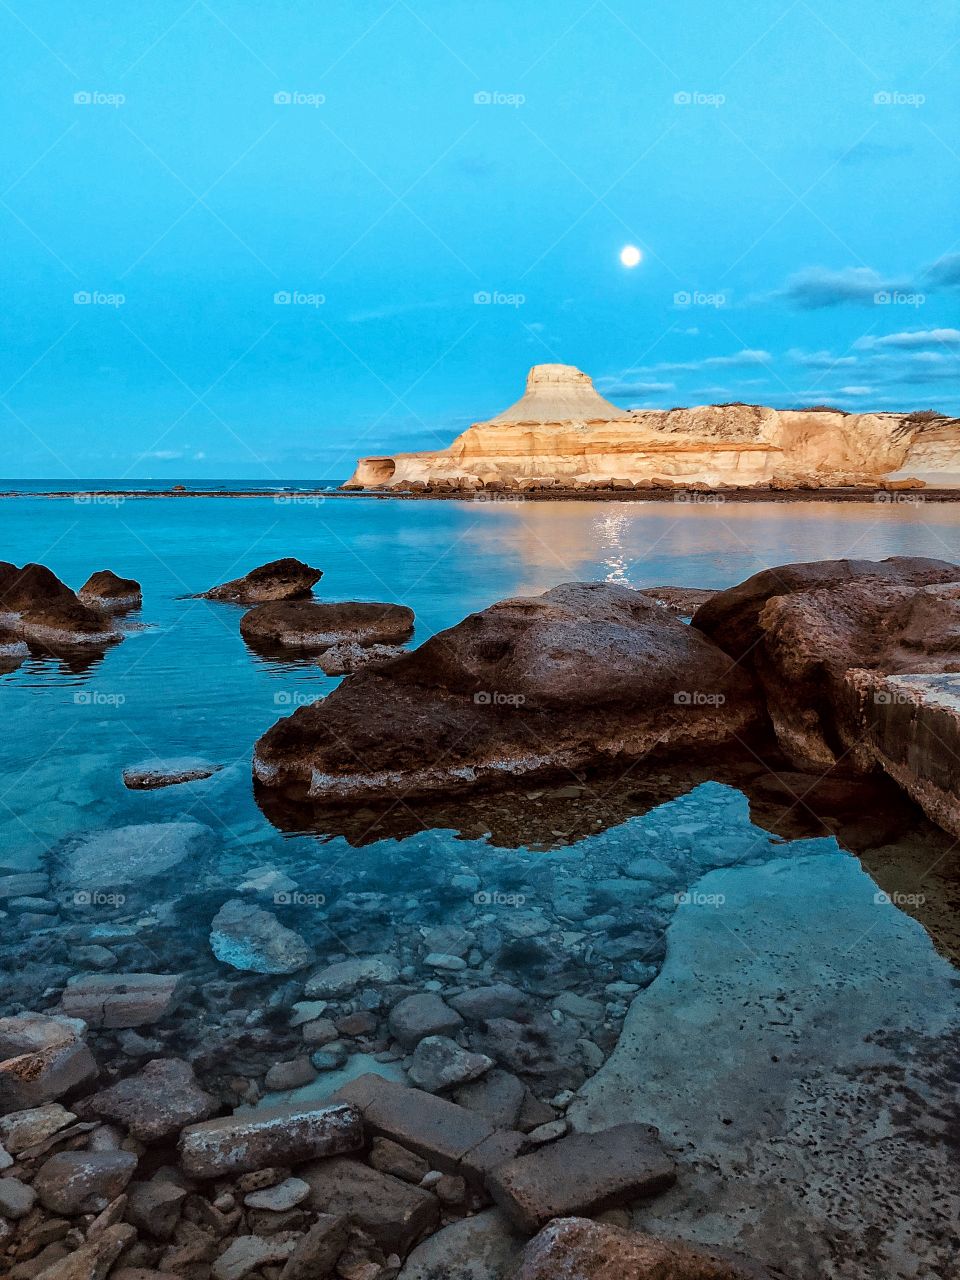 Rock formation in Xwenji Bay, on the island of Gozo. Full moon in the background.